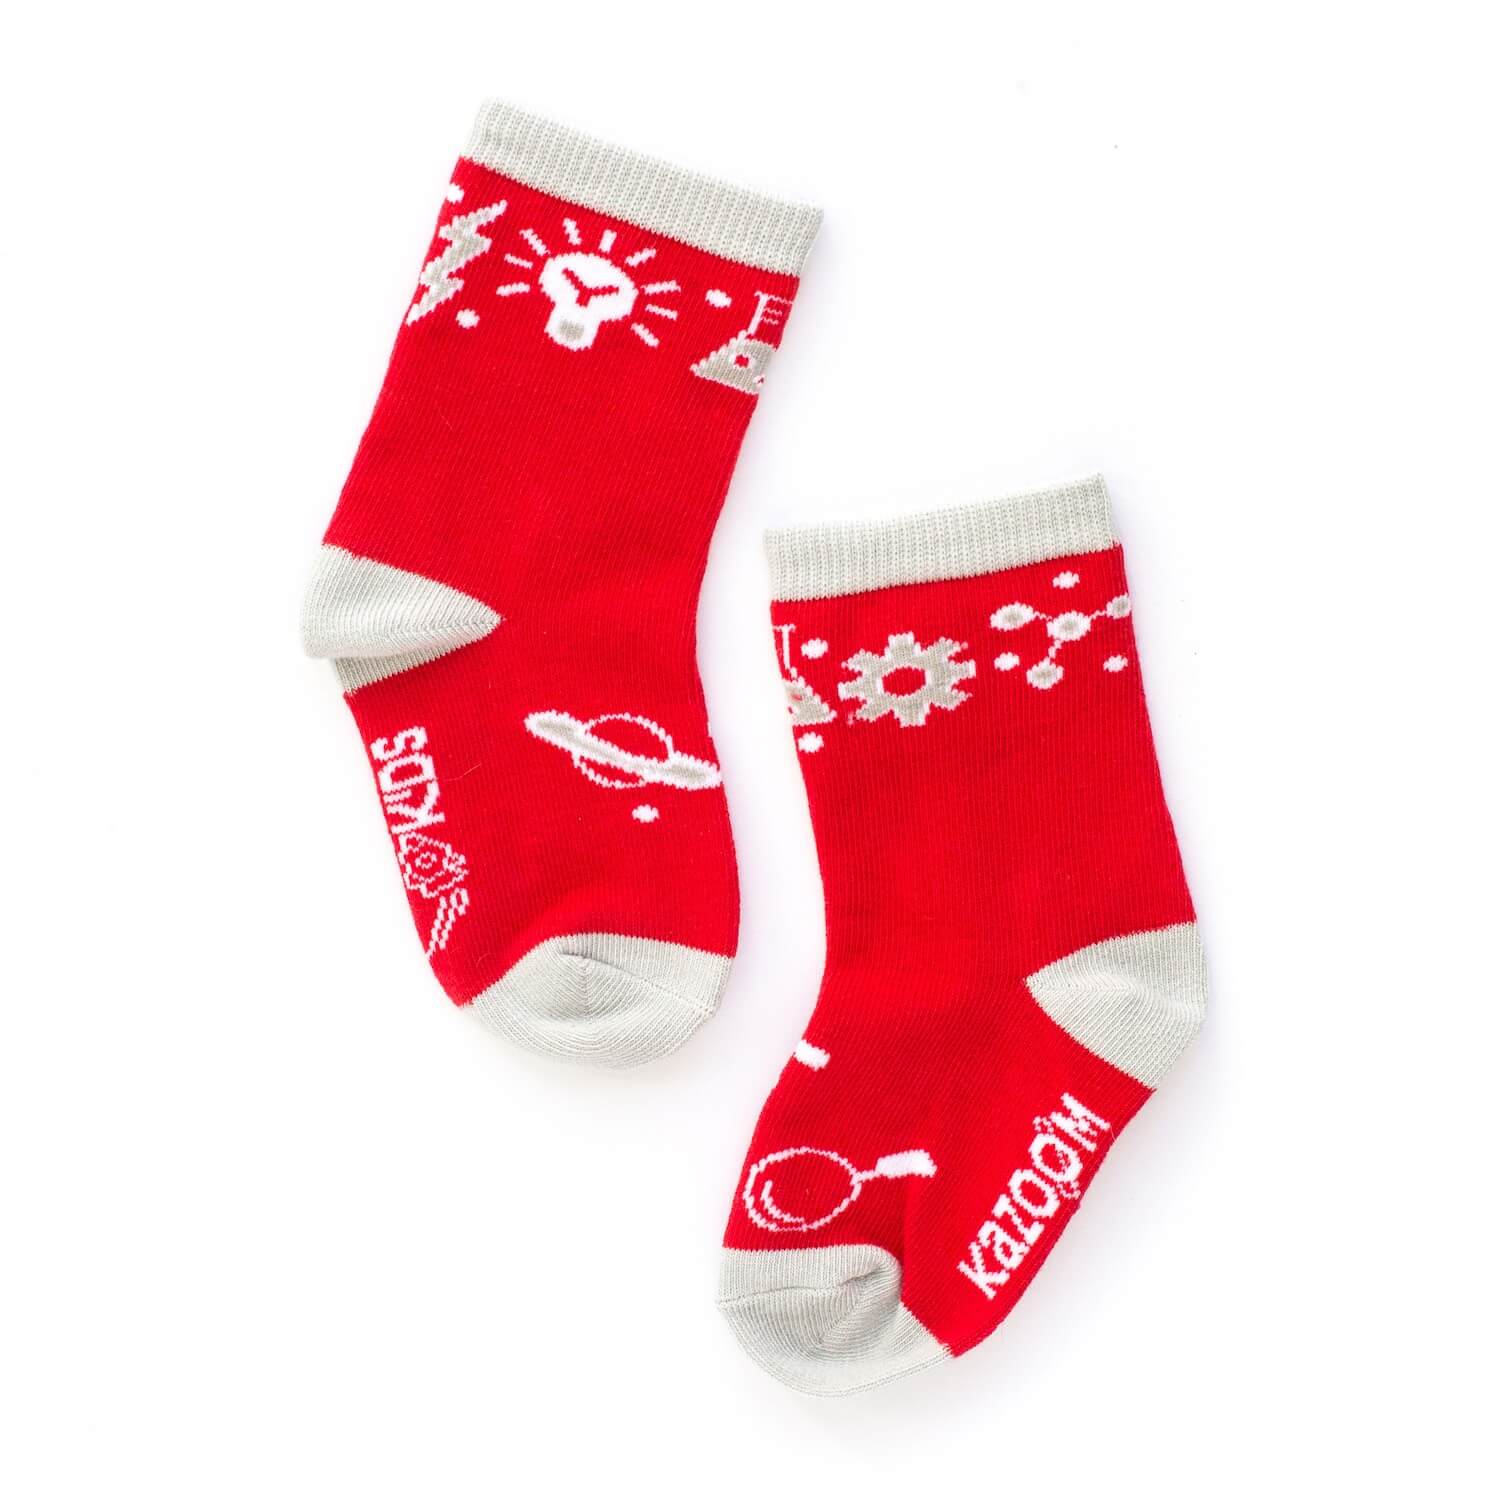 Toddler Socks - Red Science Lab Socks for Toddlers, Little Kids, and Youth